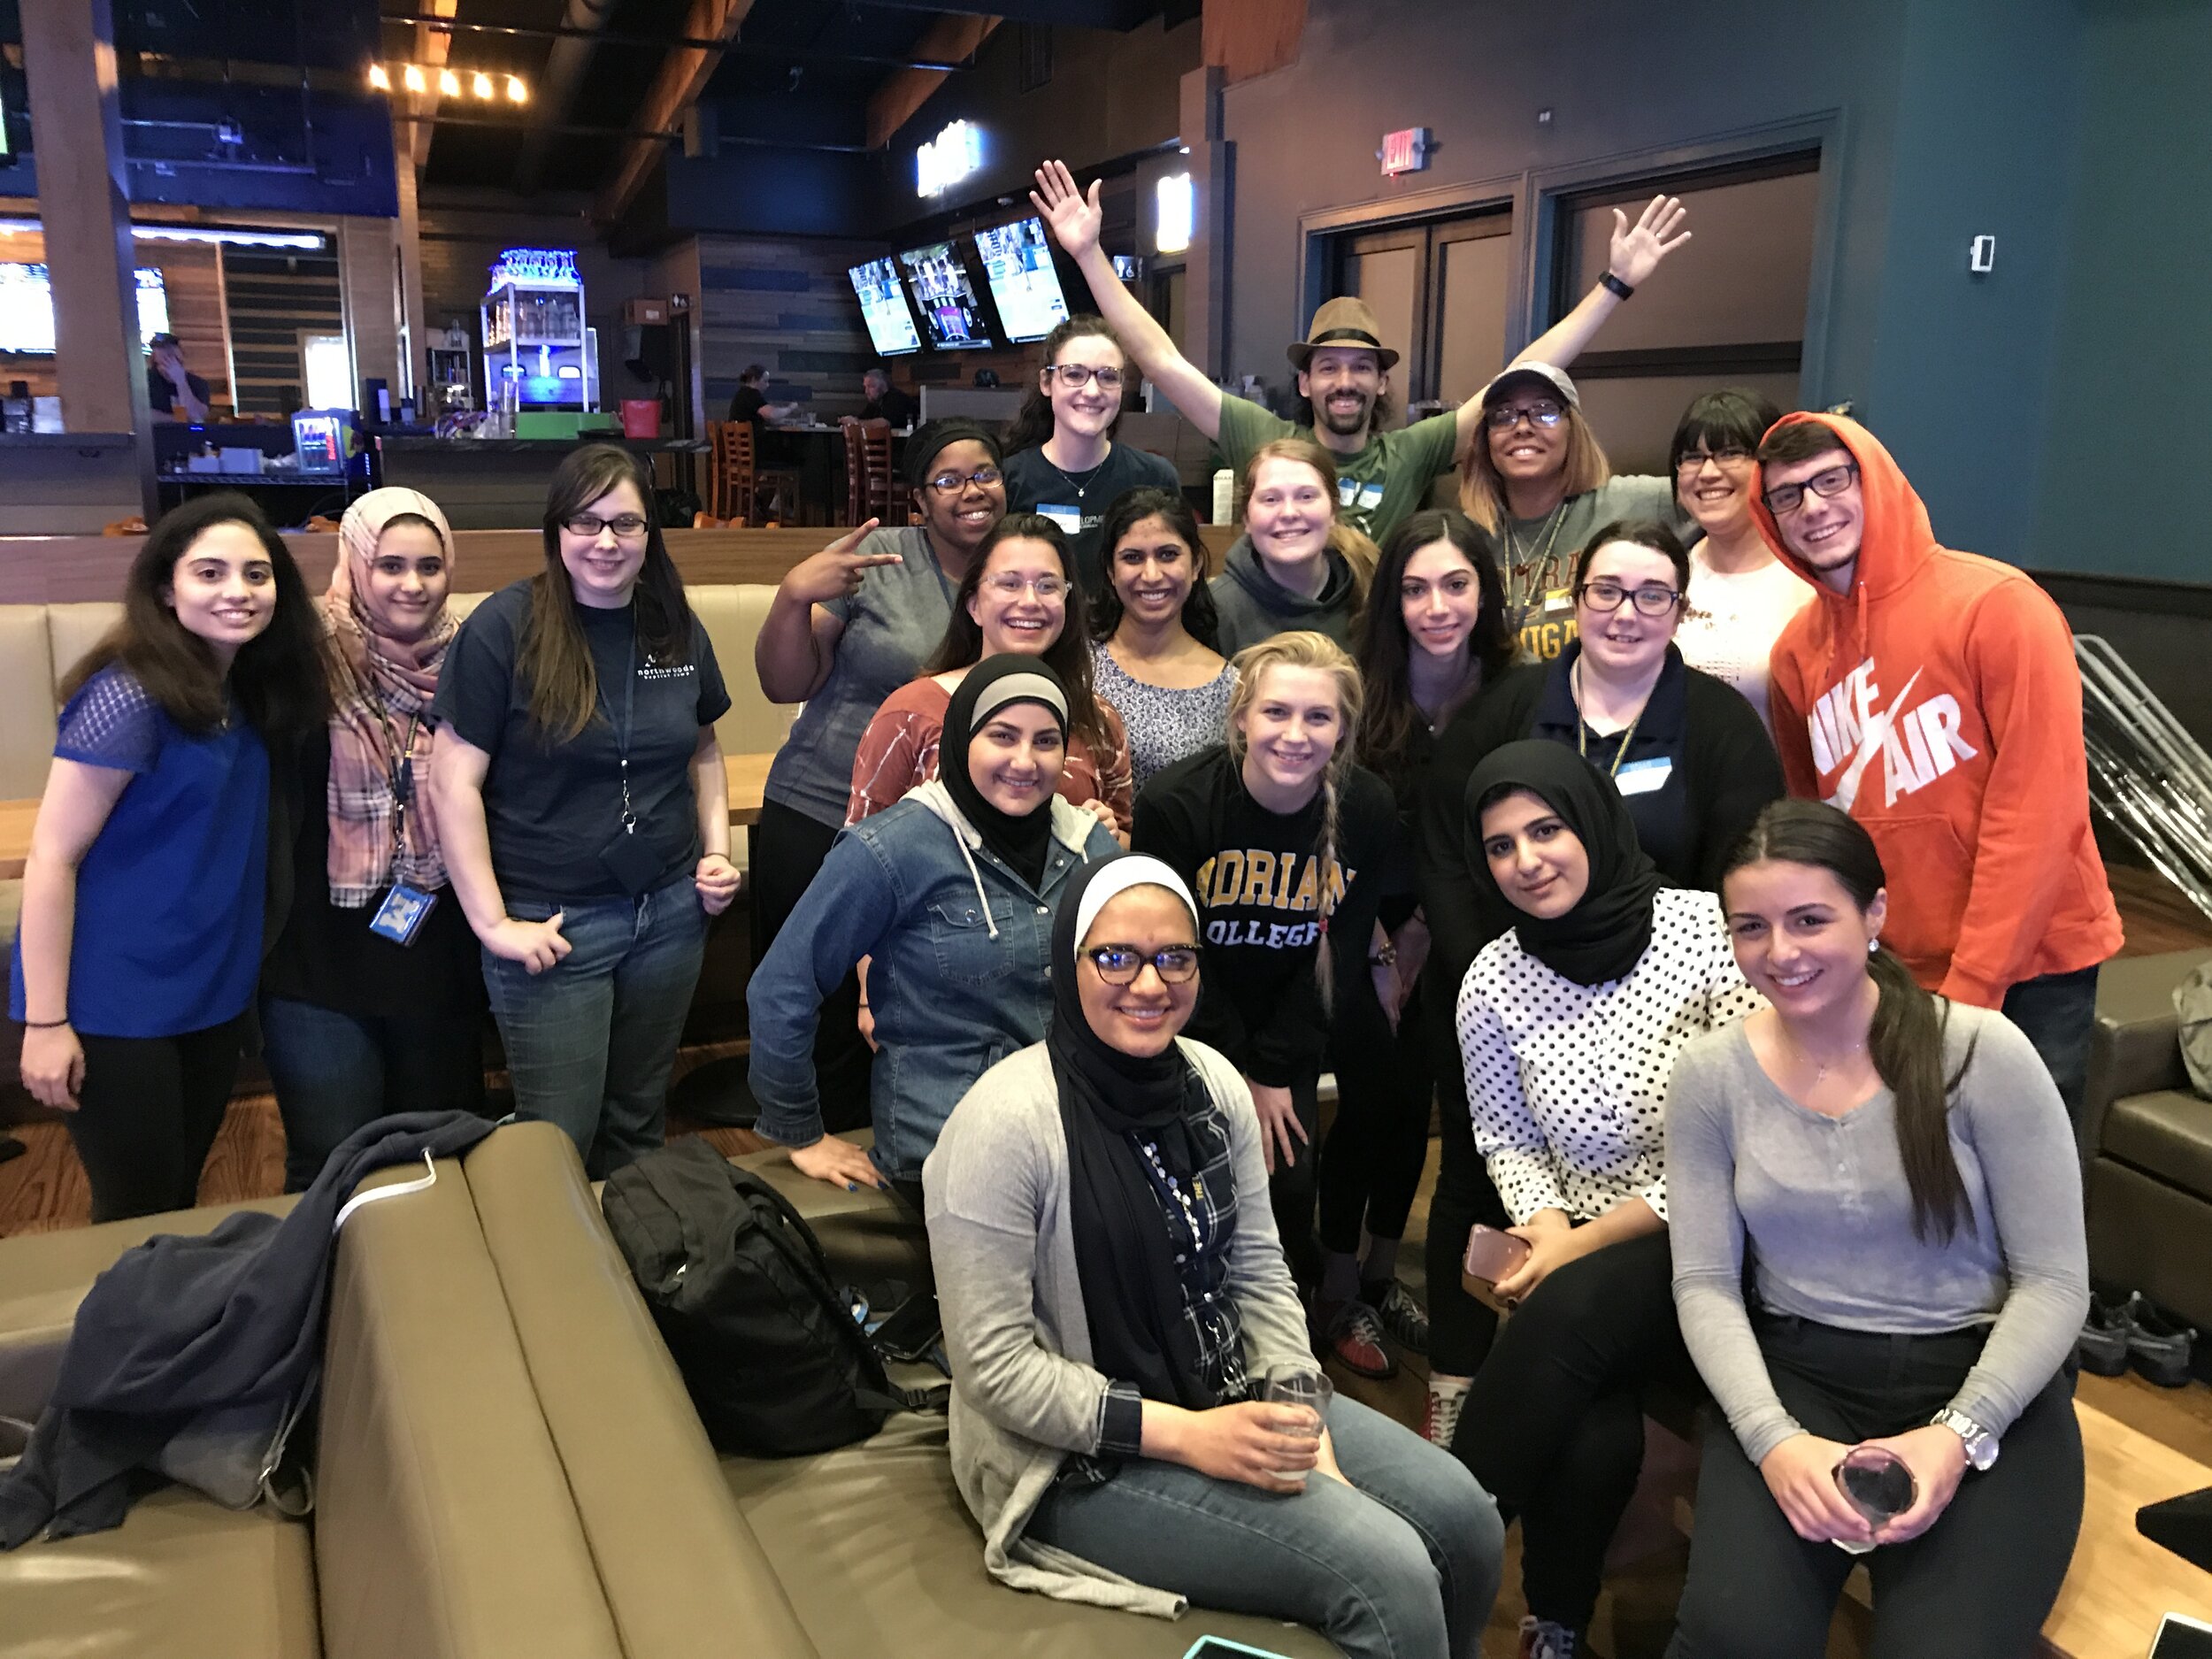  Students pose for a group photo after a night of bowling 